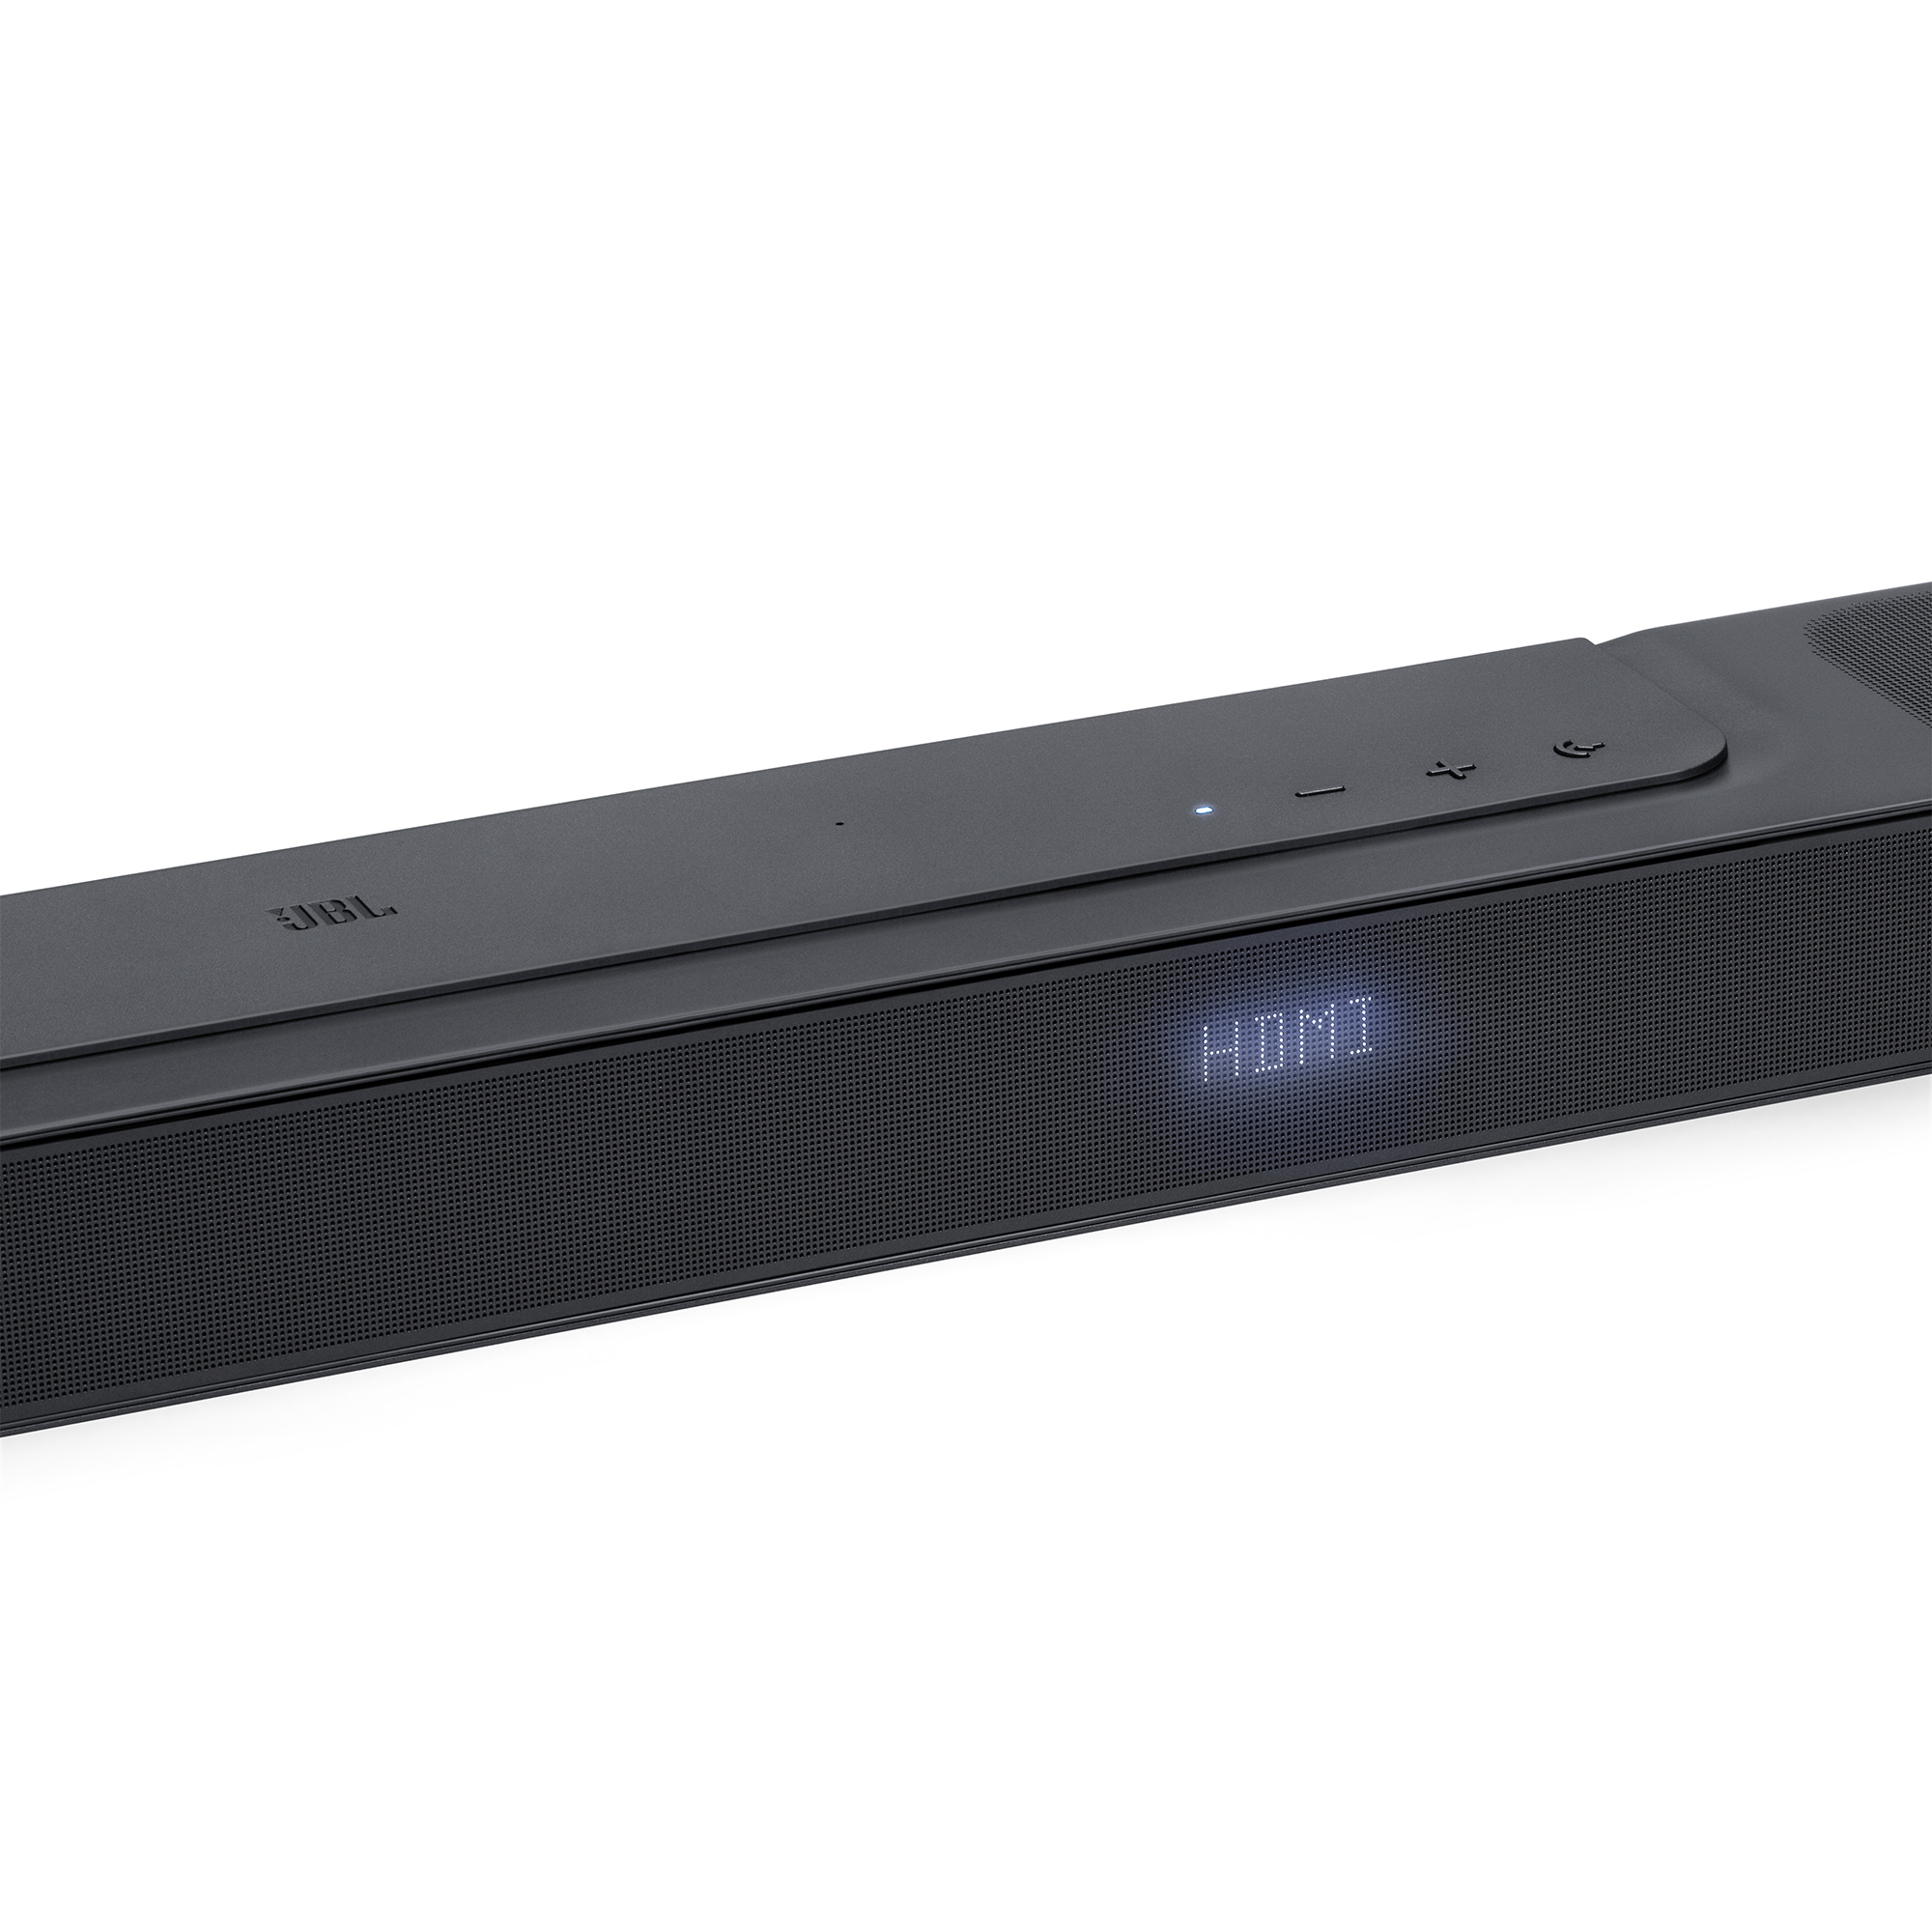 JBL BAR 800 PRO 5.1.2-Channel Soundbar with Detachable Surround Speakers and Dolby Atmos®